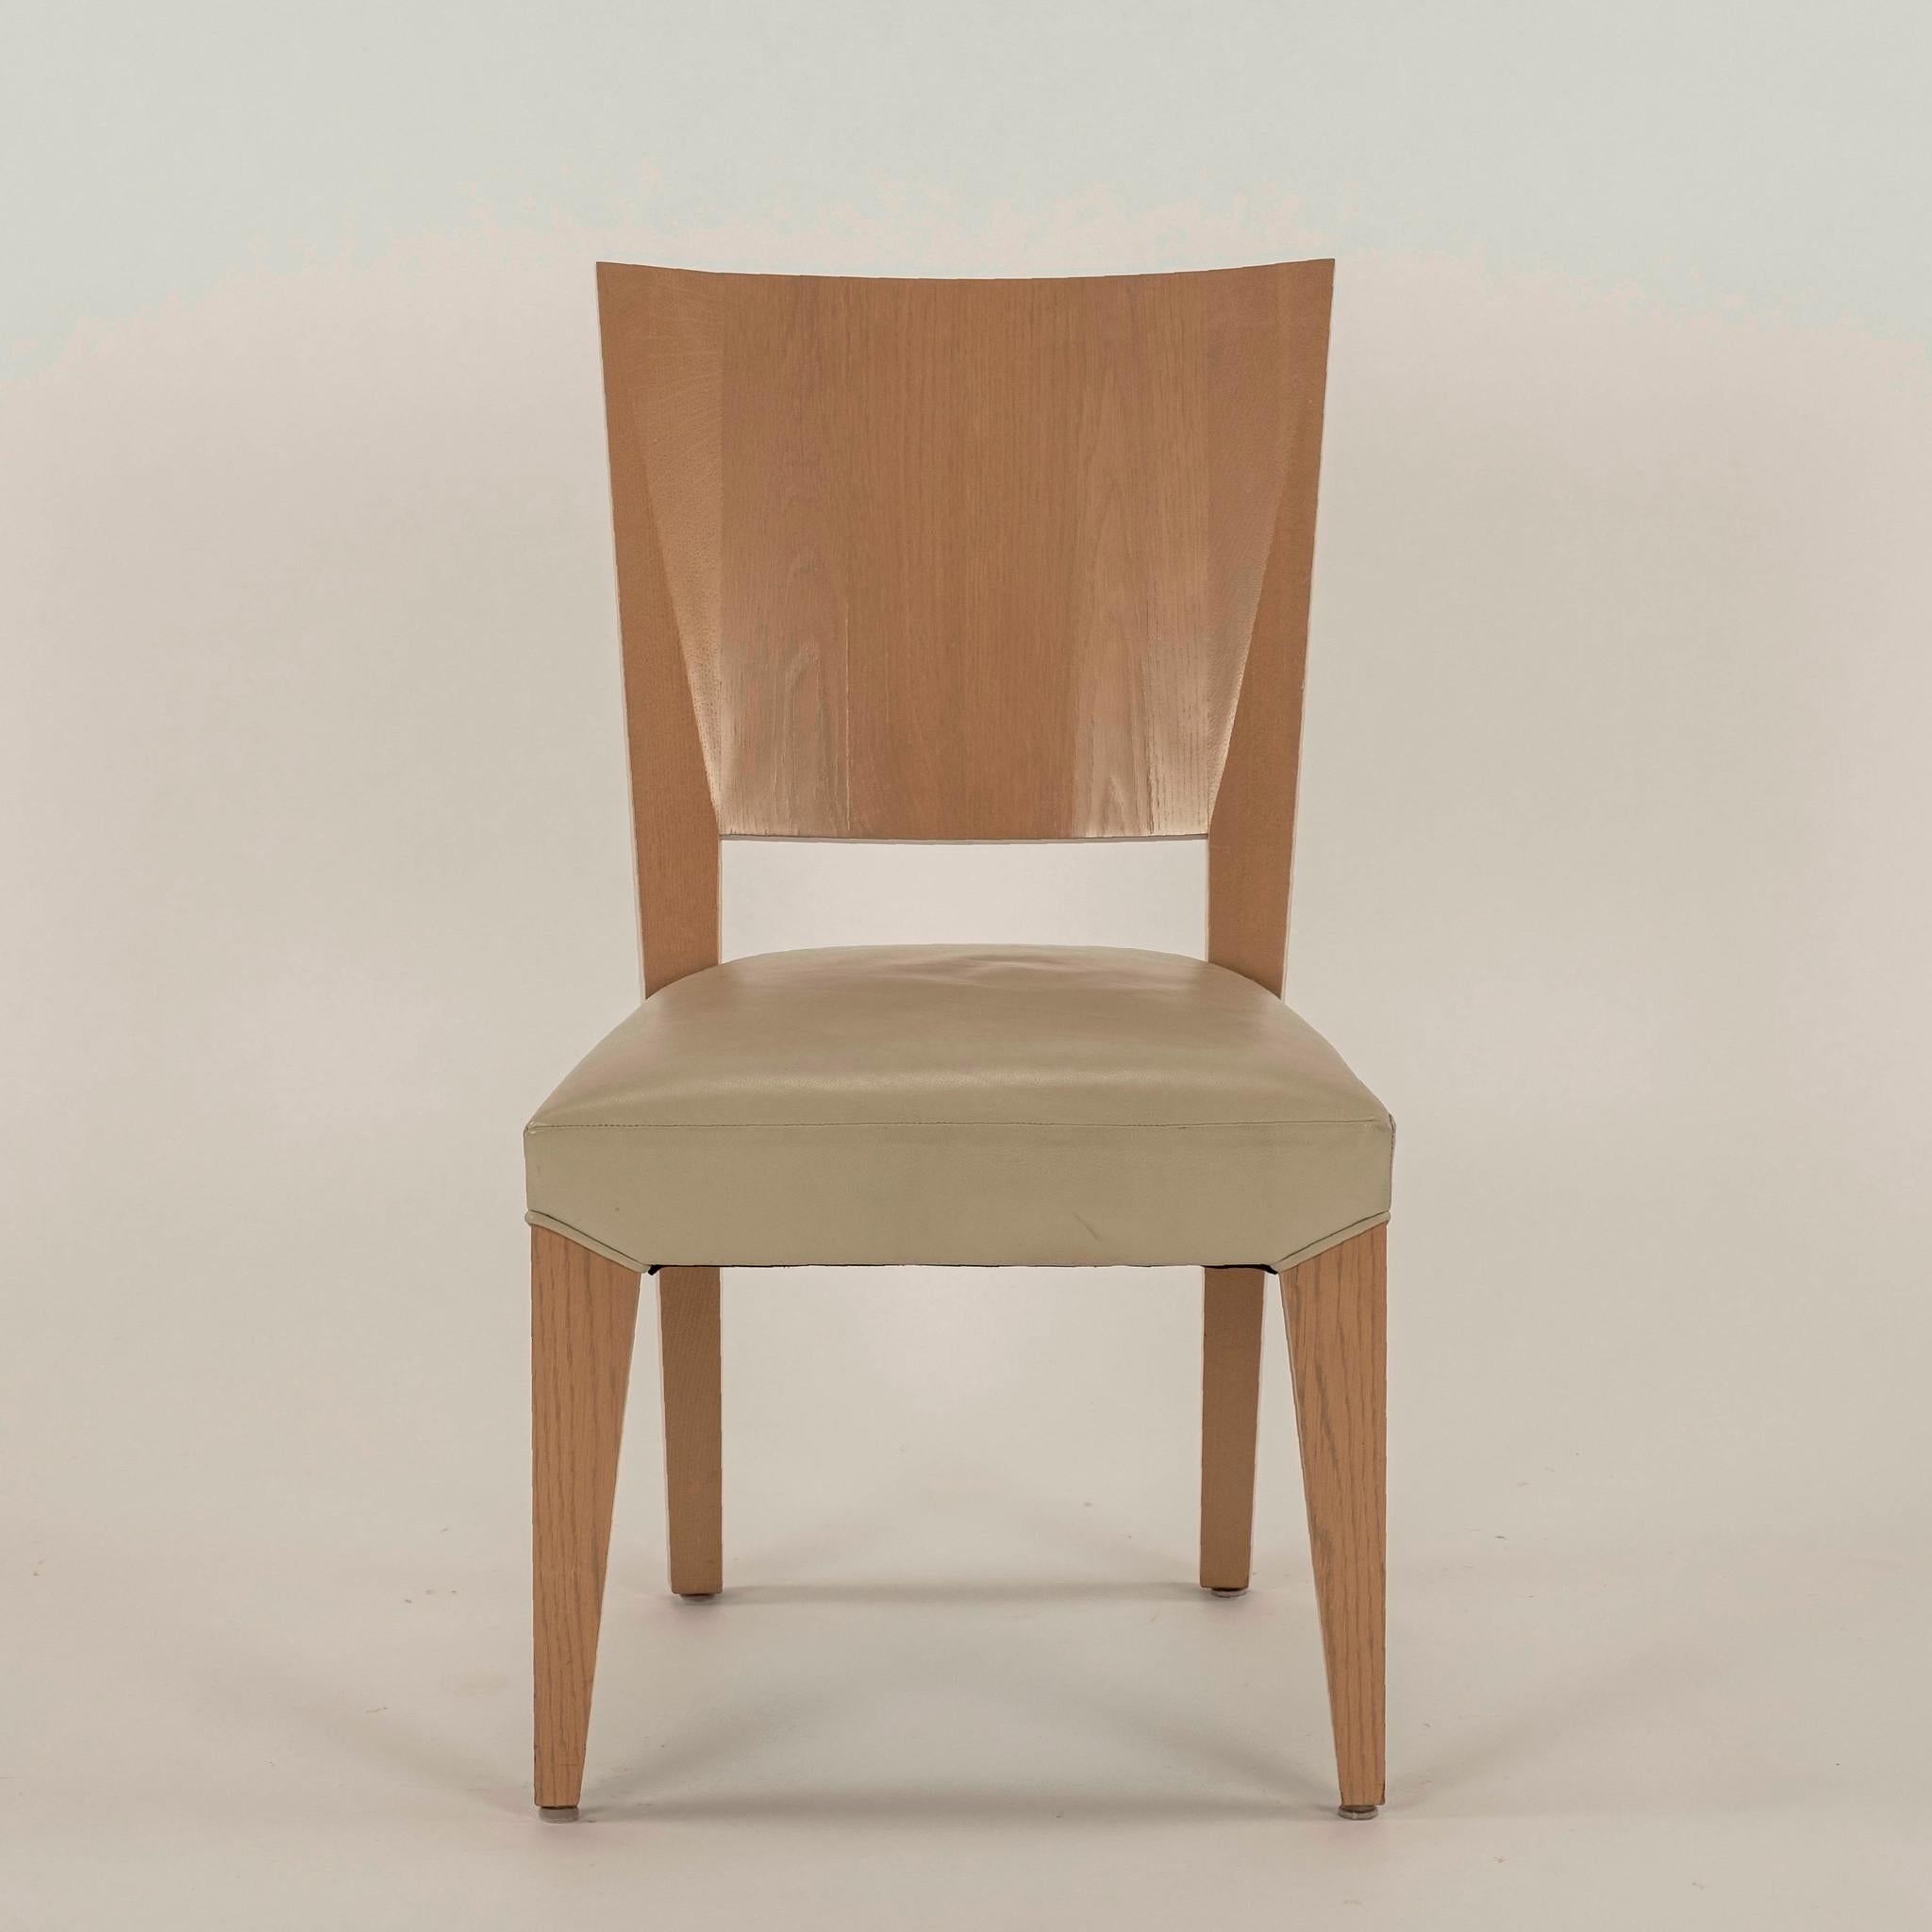 Ready to ship, vintage custom solid white oak Dakota Jackson Ocean side chair(s) upholstered in a beige taupe leather seat. Inspired by bold forms seen in African Ashanti prayer stools with influence of Czech Cubism apparent in the use of broad